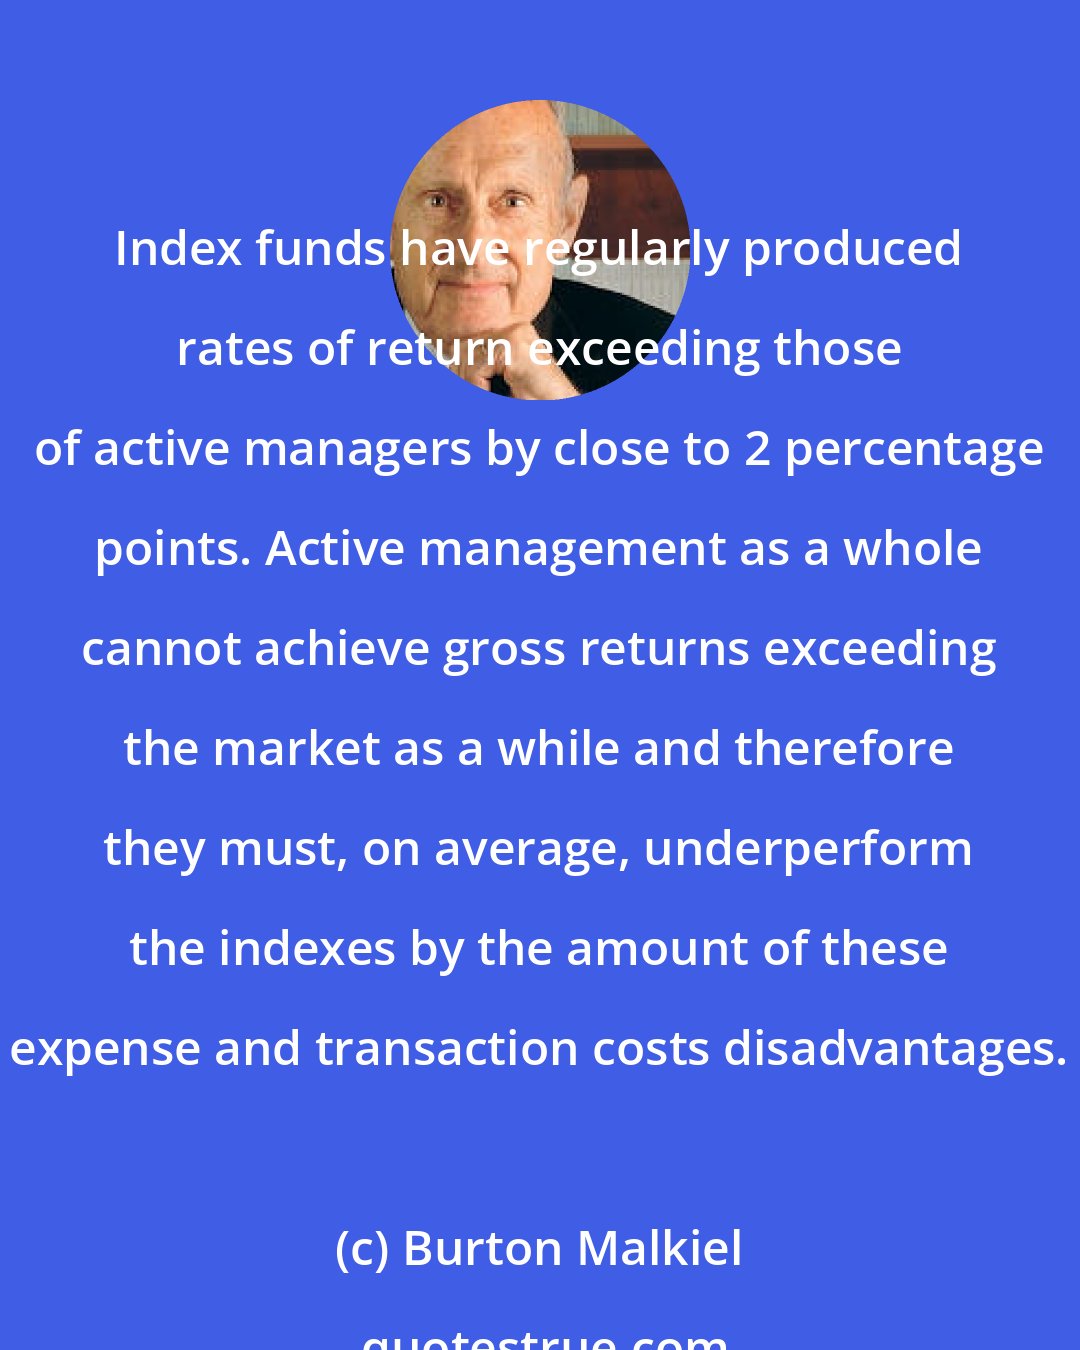 Burton Malkiel: Index funds have regularly produced rates of return exceeding those of active managers by close to 2 percentage points. Active management as a whole cannot achieve gross returns exceeding the market as a while and therefore they must, on average, underperform the indexes by the amount of these expense and transaction costs disadvantages.